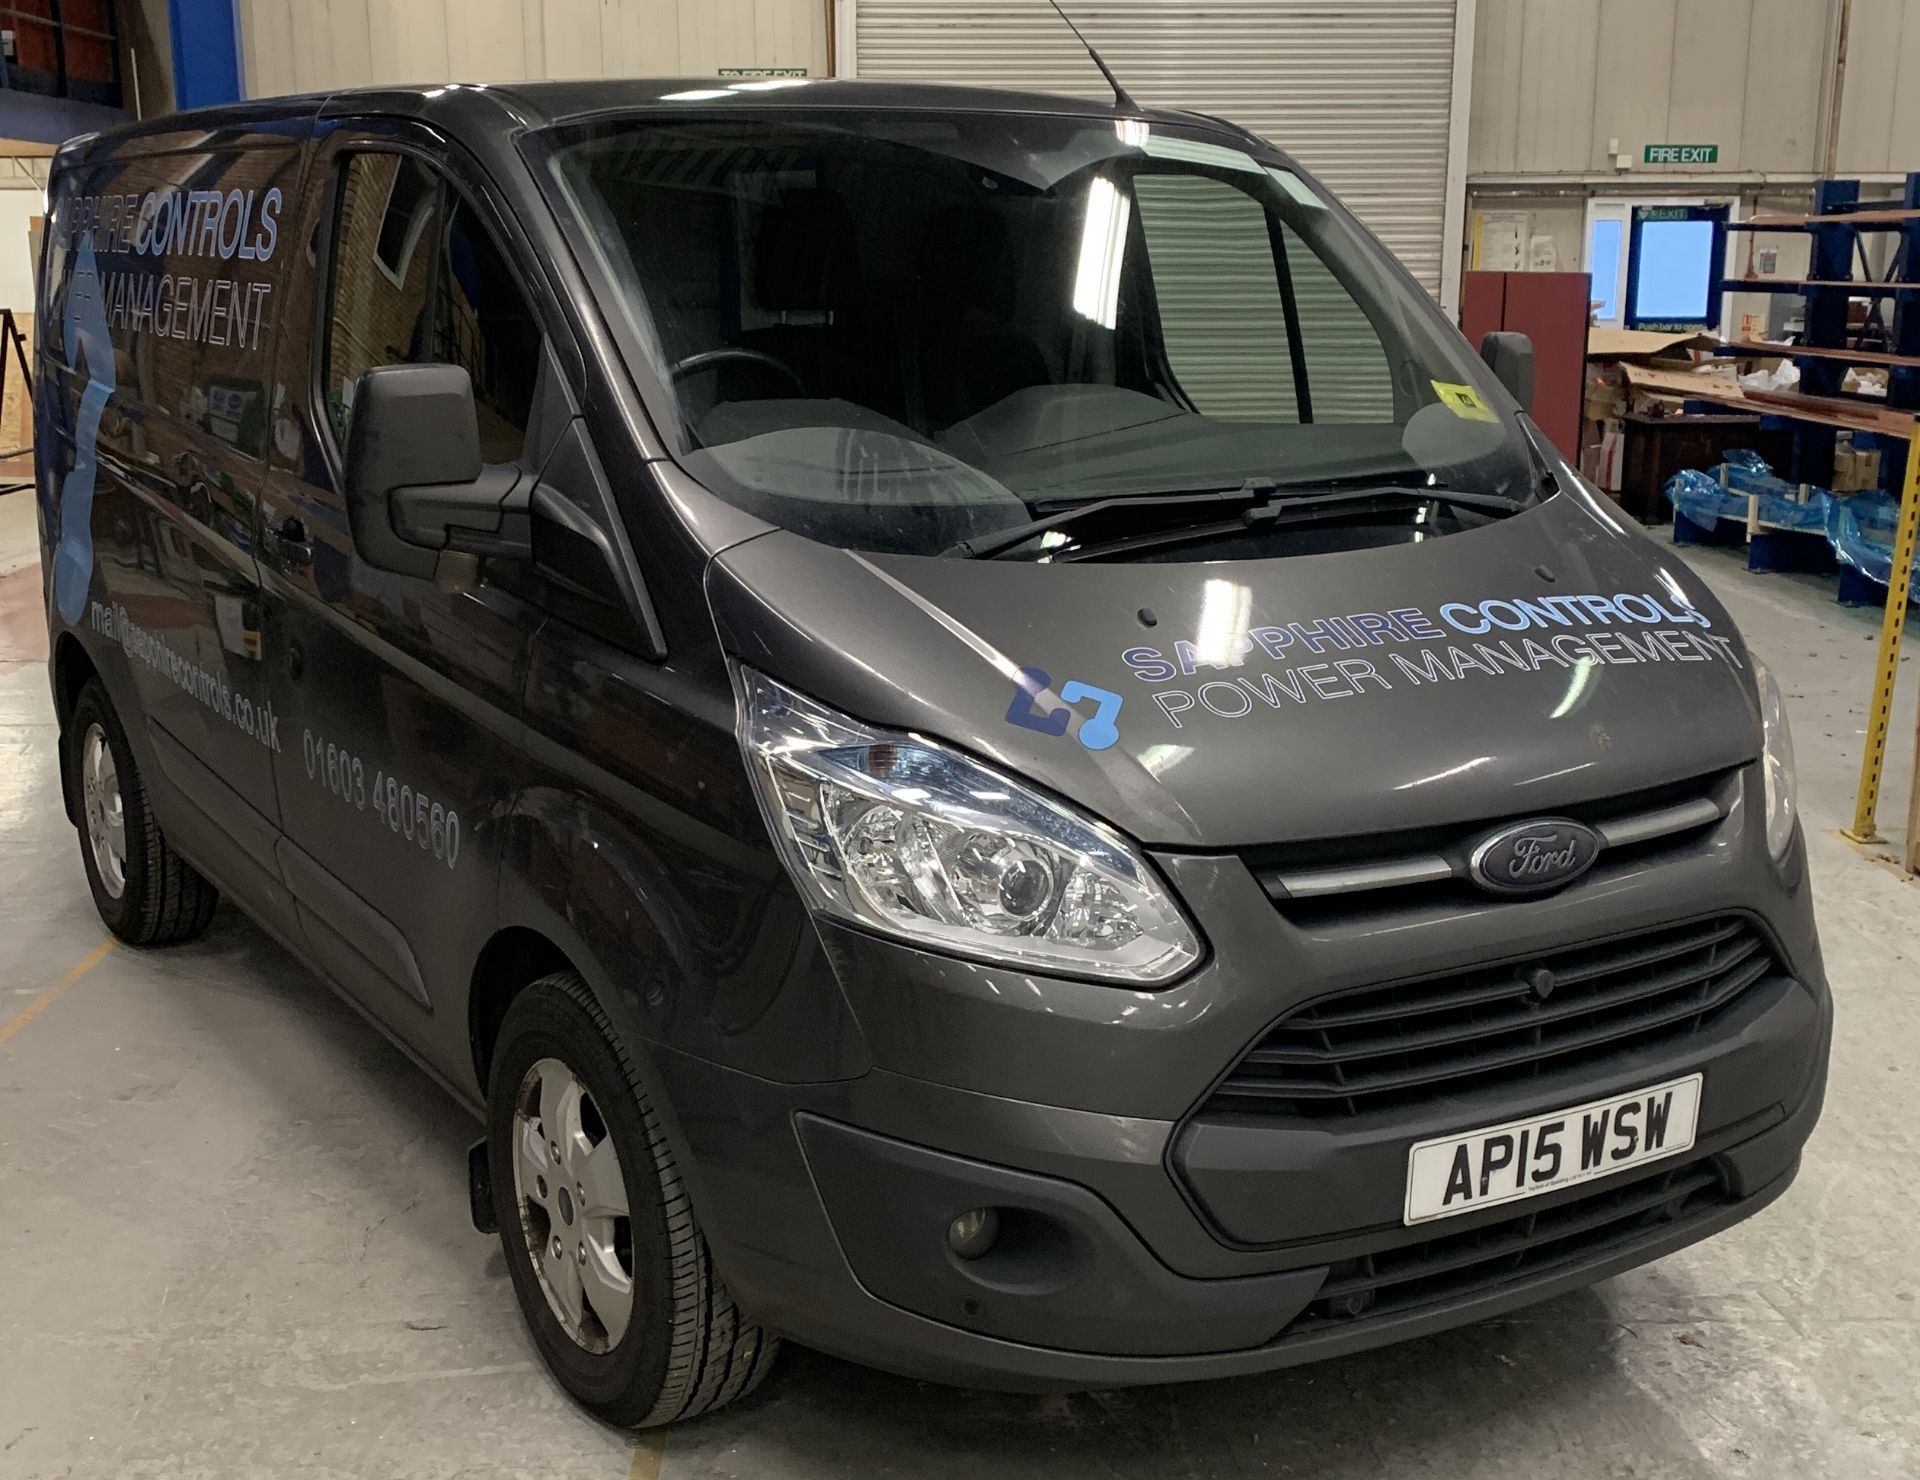 Ford Transit Custom 270 L1 low roof panel van, registration number AP15 WSW, first registered 18th